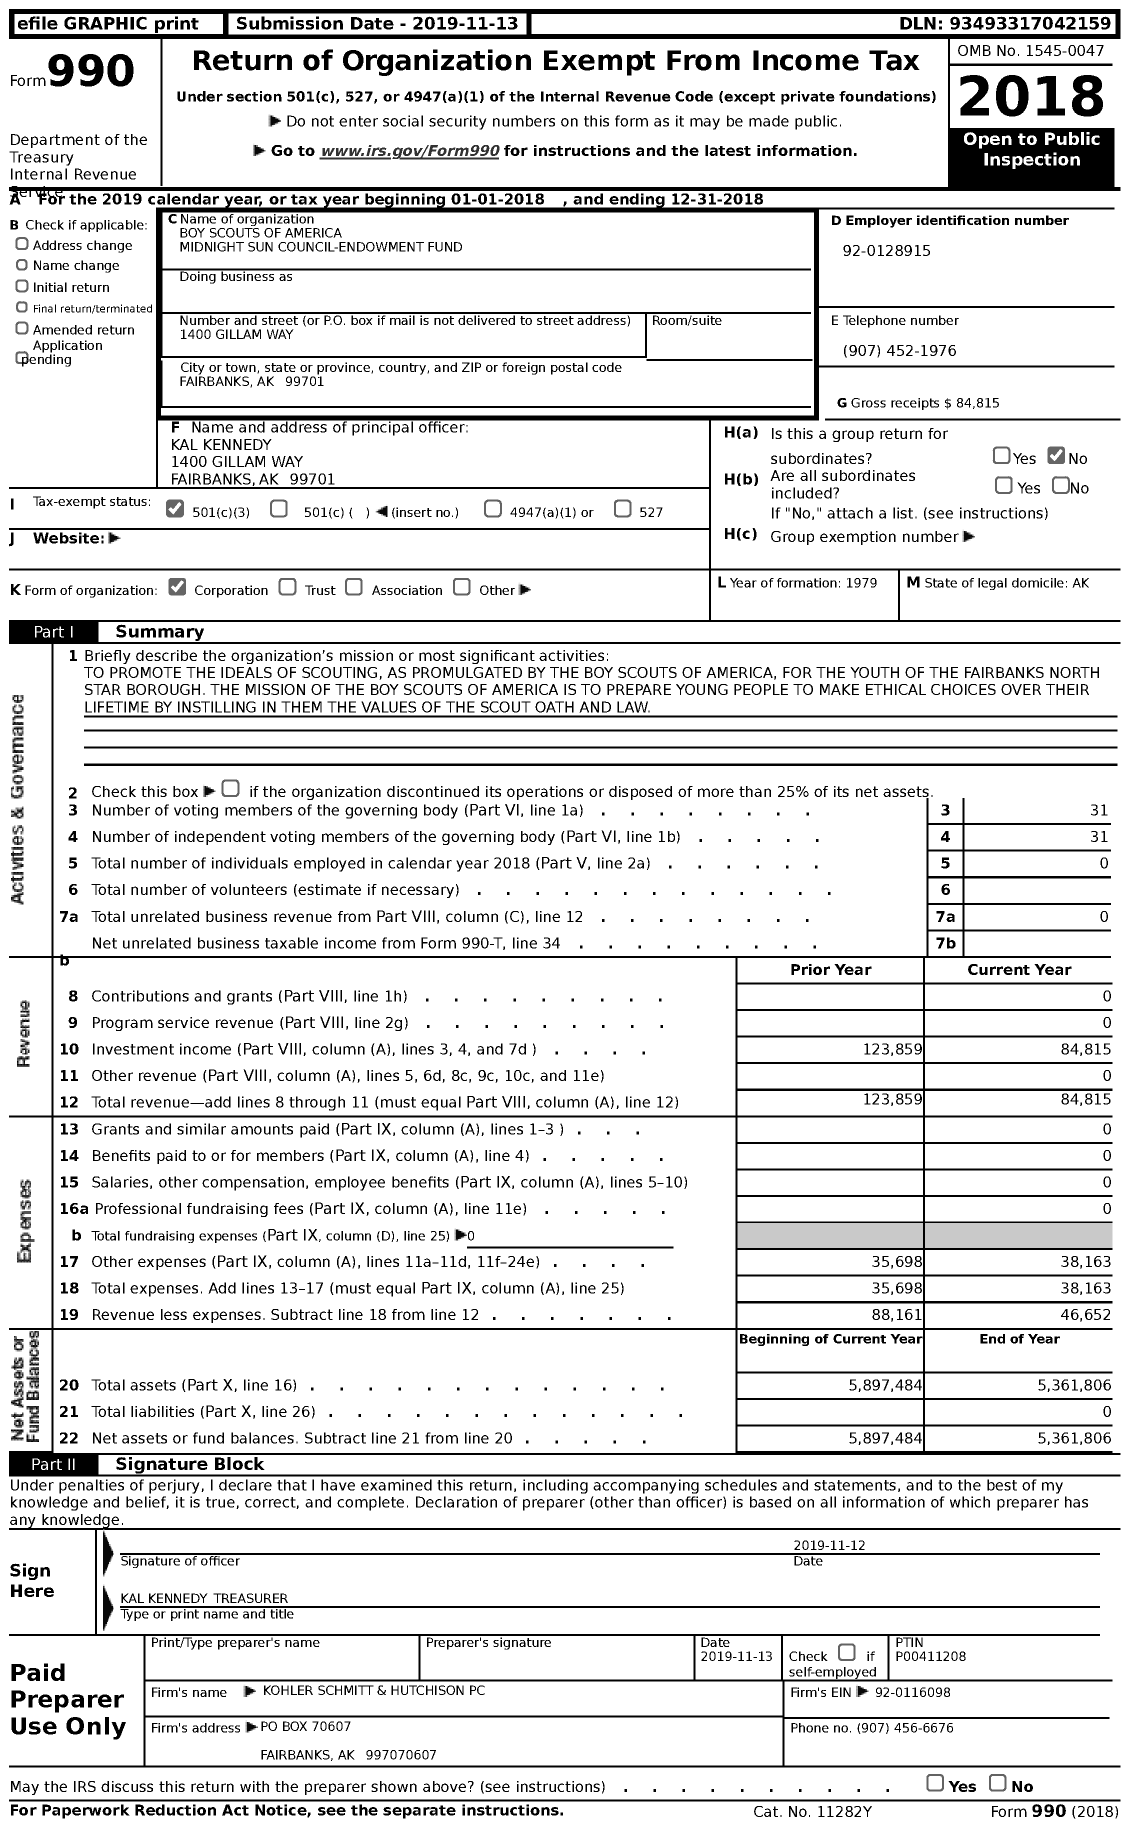 Image of first page of 2018 Form 990 for Boy Scouts of America - 696 Midnight Sun Council TR Fund